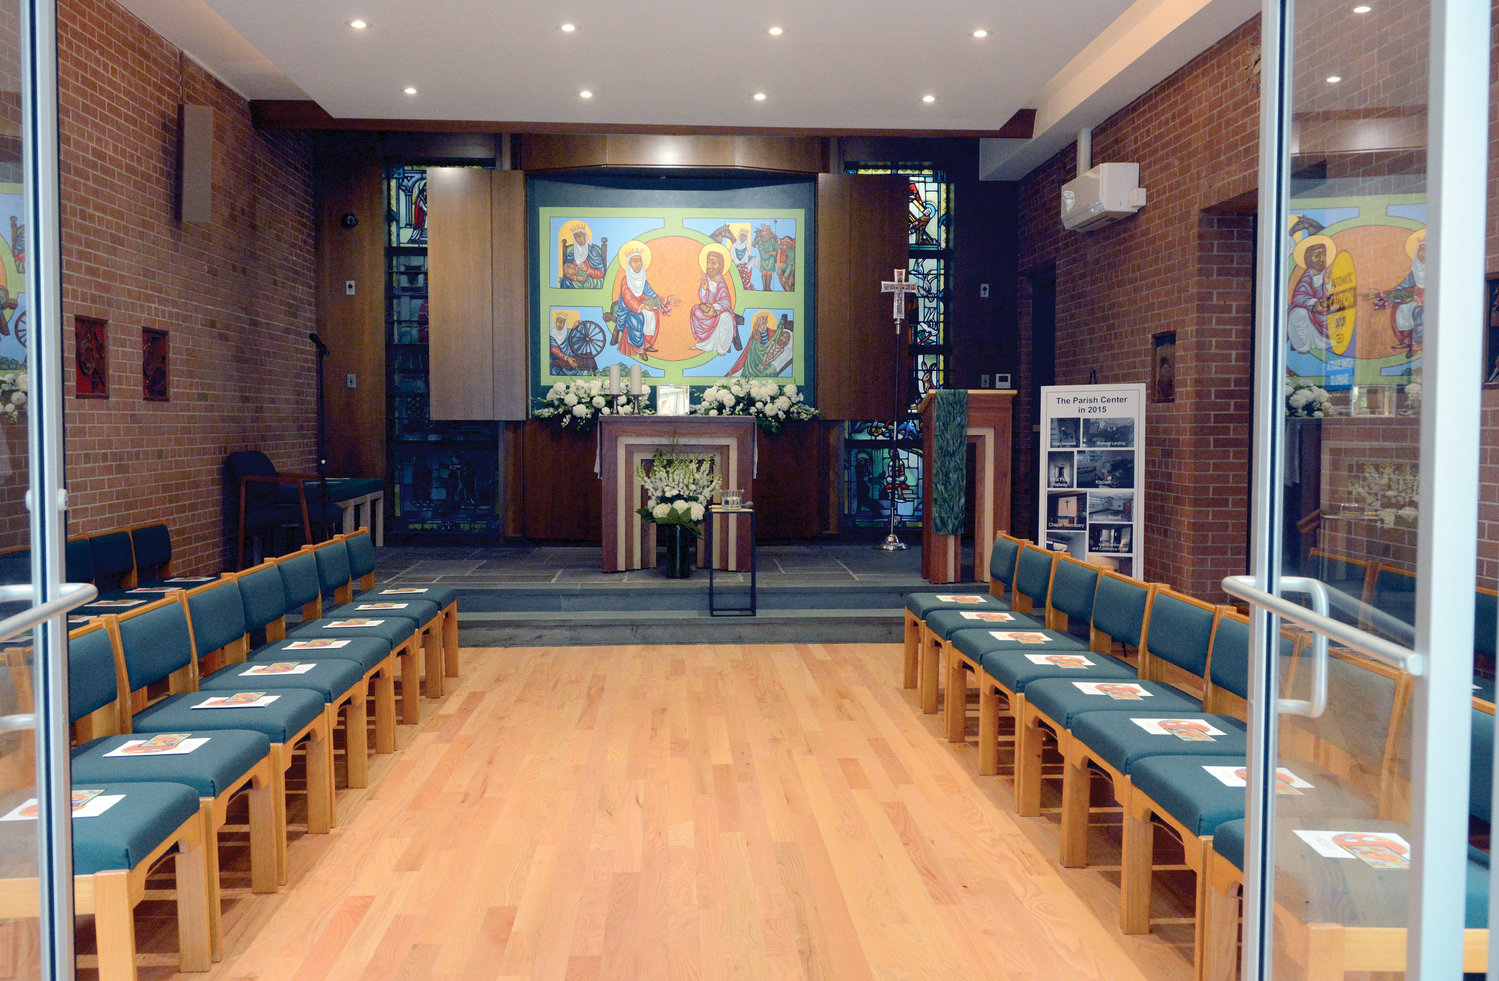 Before the liturgy at St. Monica’s Church, the cardinal blessed the renovated parish center, formerly a convent, which includes the 35-seat St. Elizabeth of Hungary Chapel. The icon behind the altar depicts scenes from the life of St. Elizabeth of Hungary. Father Donald Baker, the pastor, designed and painted the icon in collaboration w